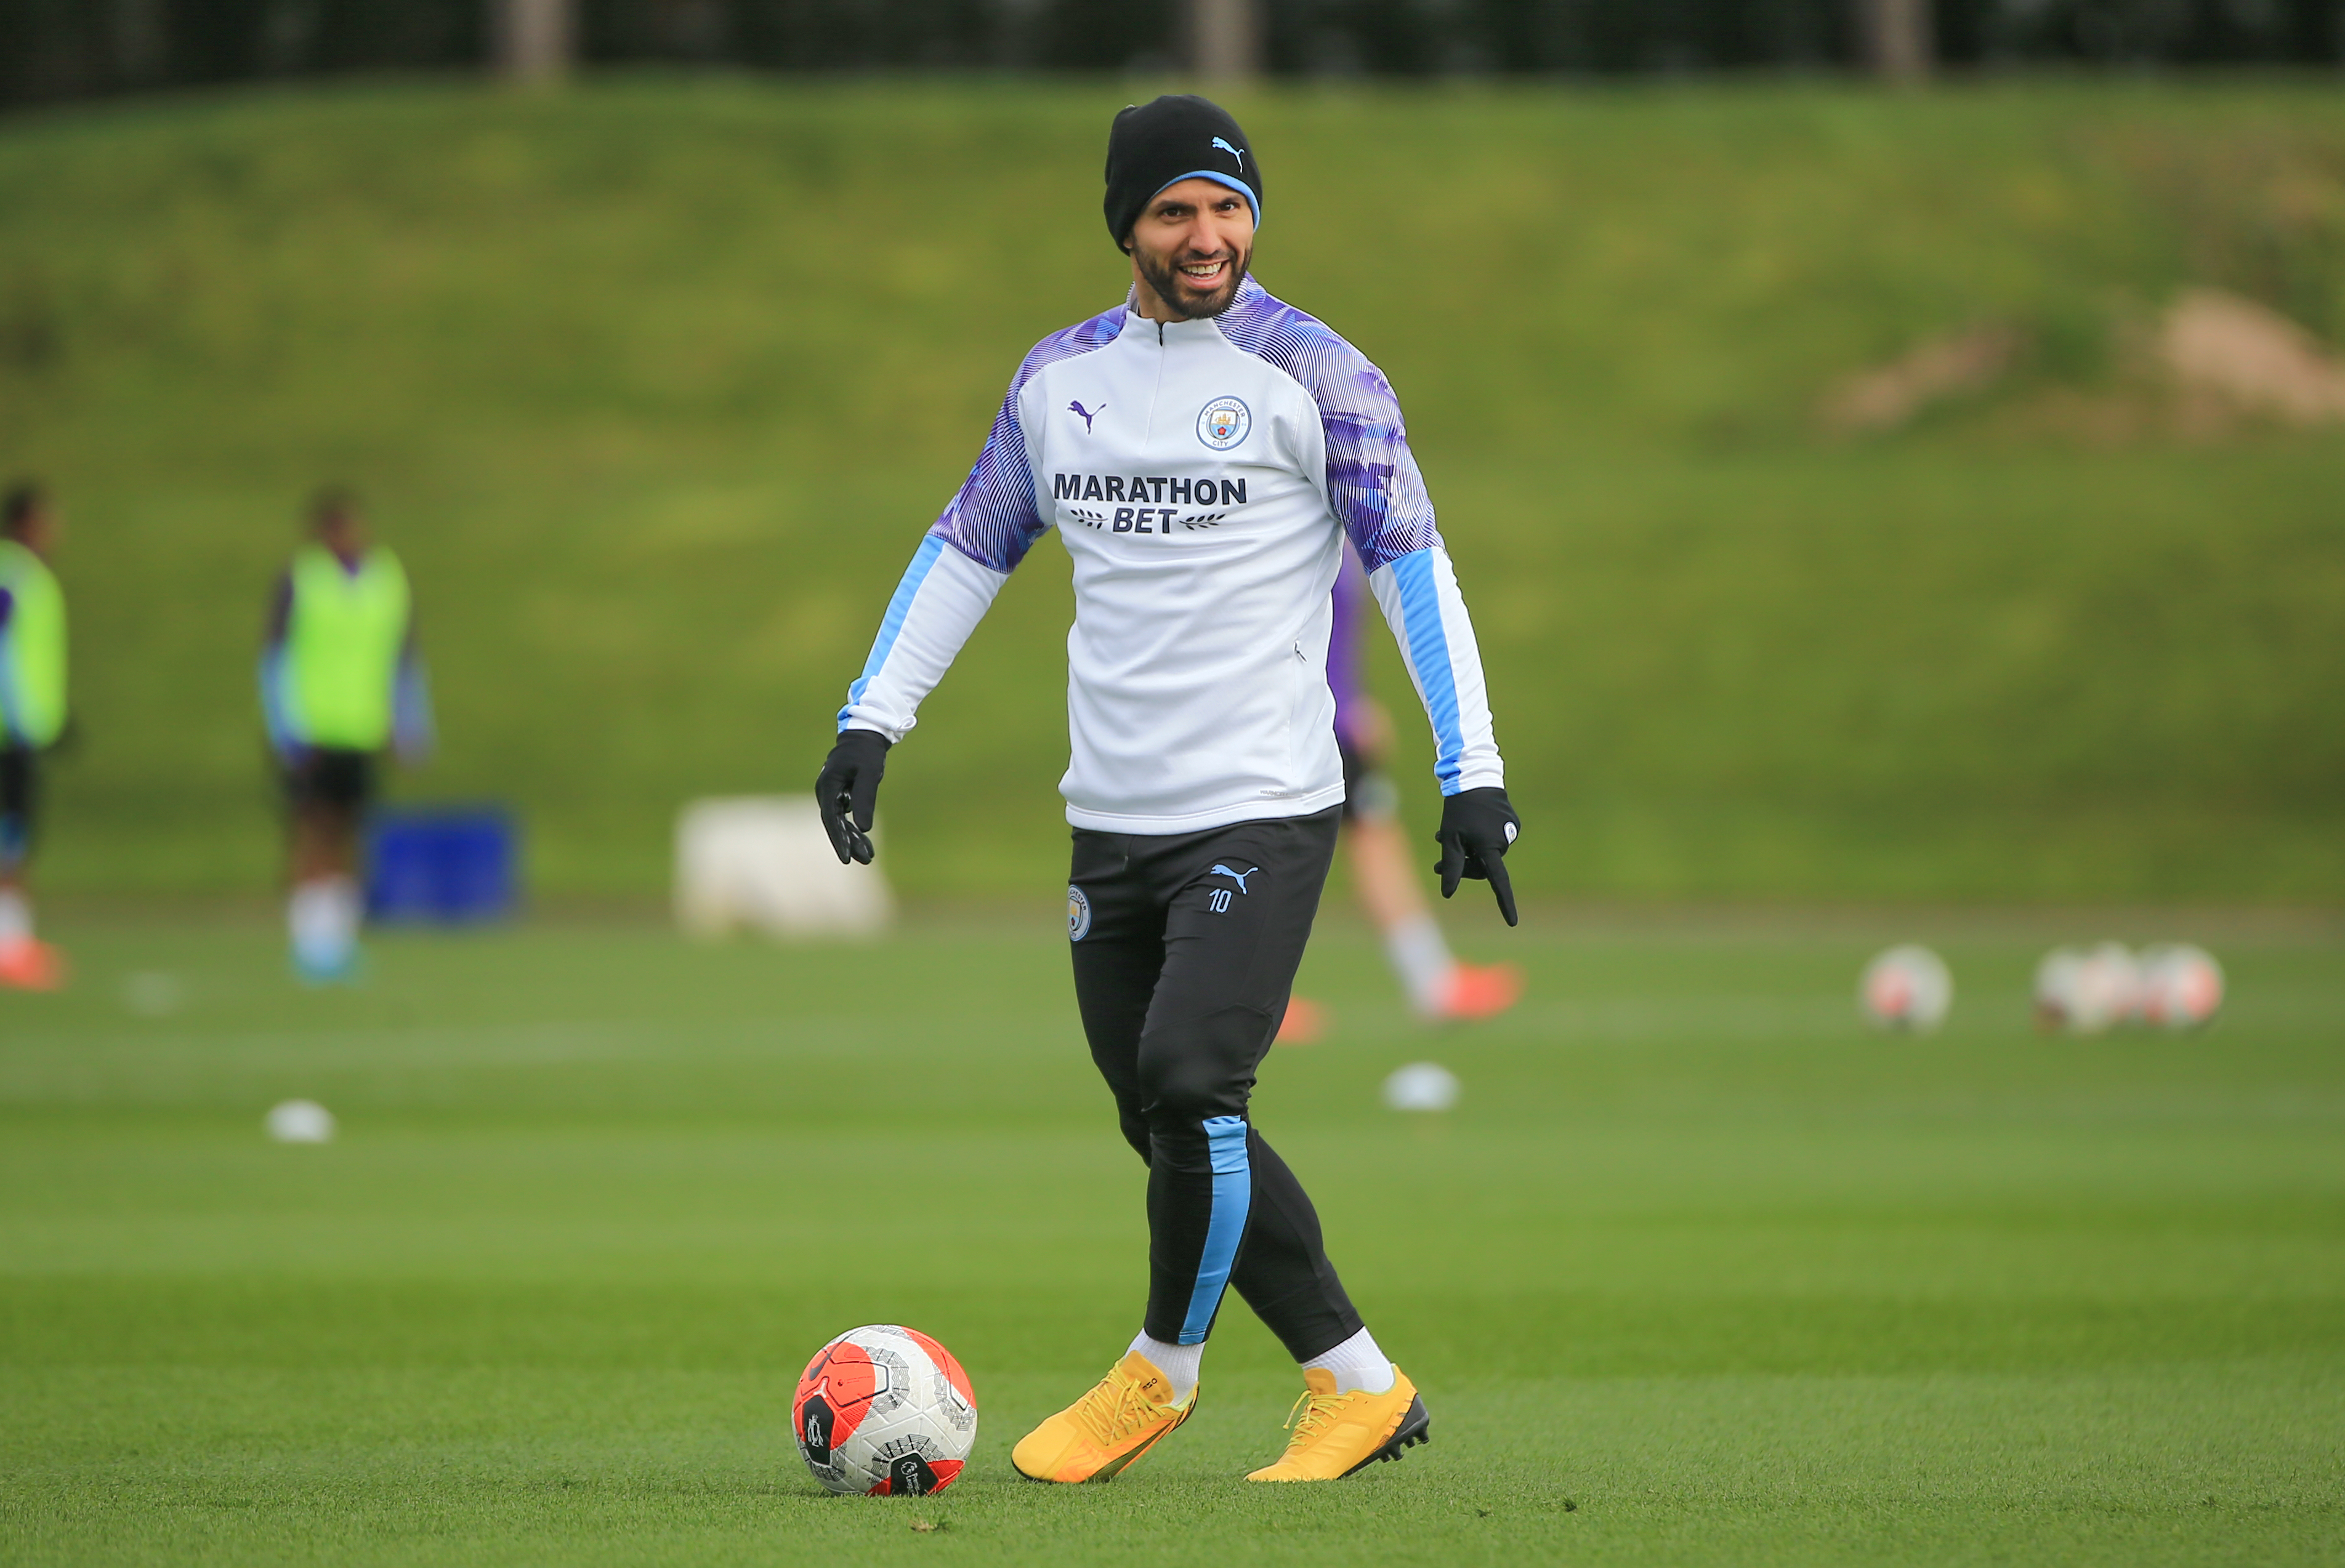 MANCHESTER, ENGLAND - MARCH 12: Manchester City's Sergio Aguero in action during training at Manchester City Football Academy on March 12, 2020 in Manchester, England. (Photo by Tom Flathers/Manchester City FC via Getty Images)